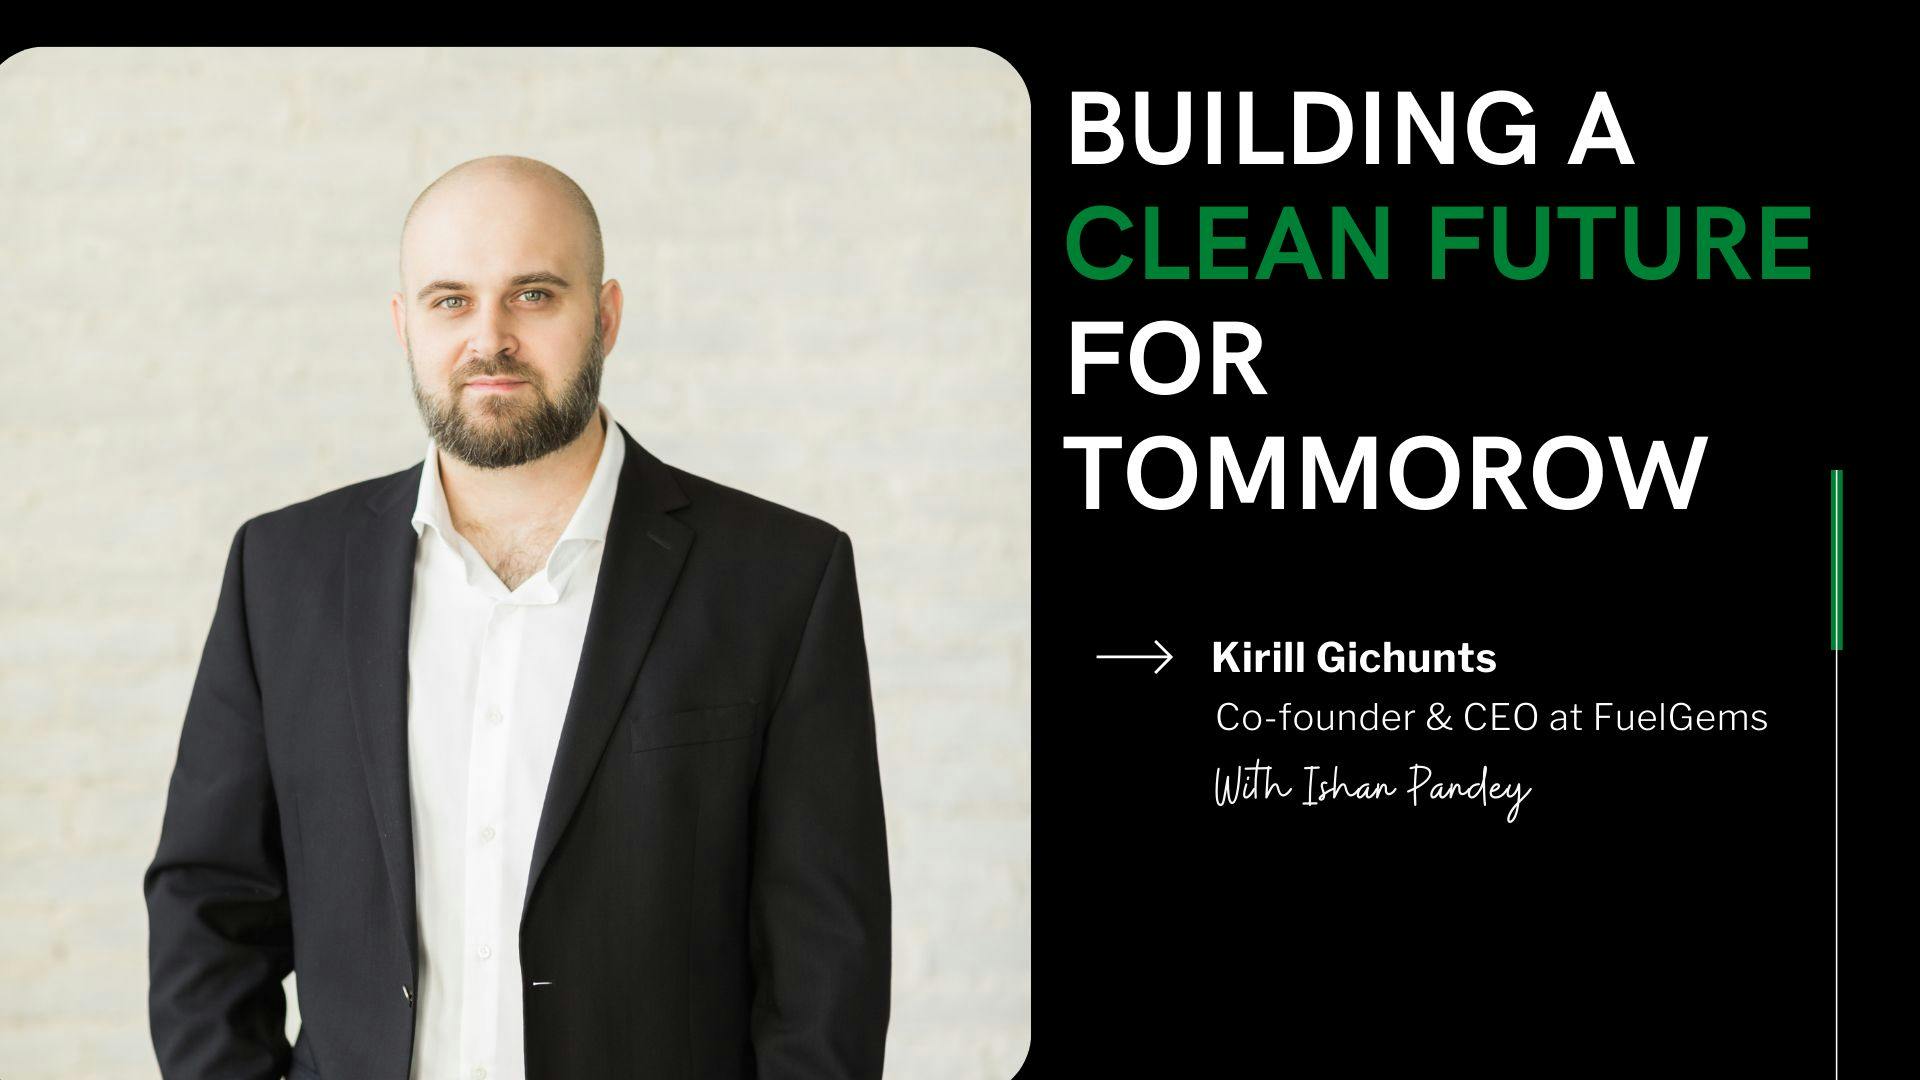 featured image - Why Nanoparticle Technology is the Key for a Clean Future with Kirill Gichunts, CEO at FuelGems